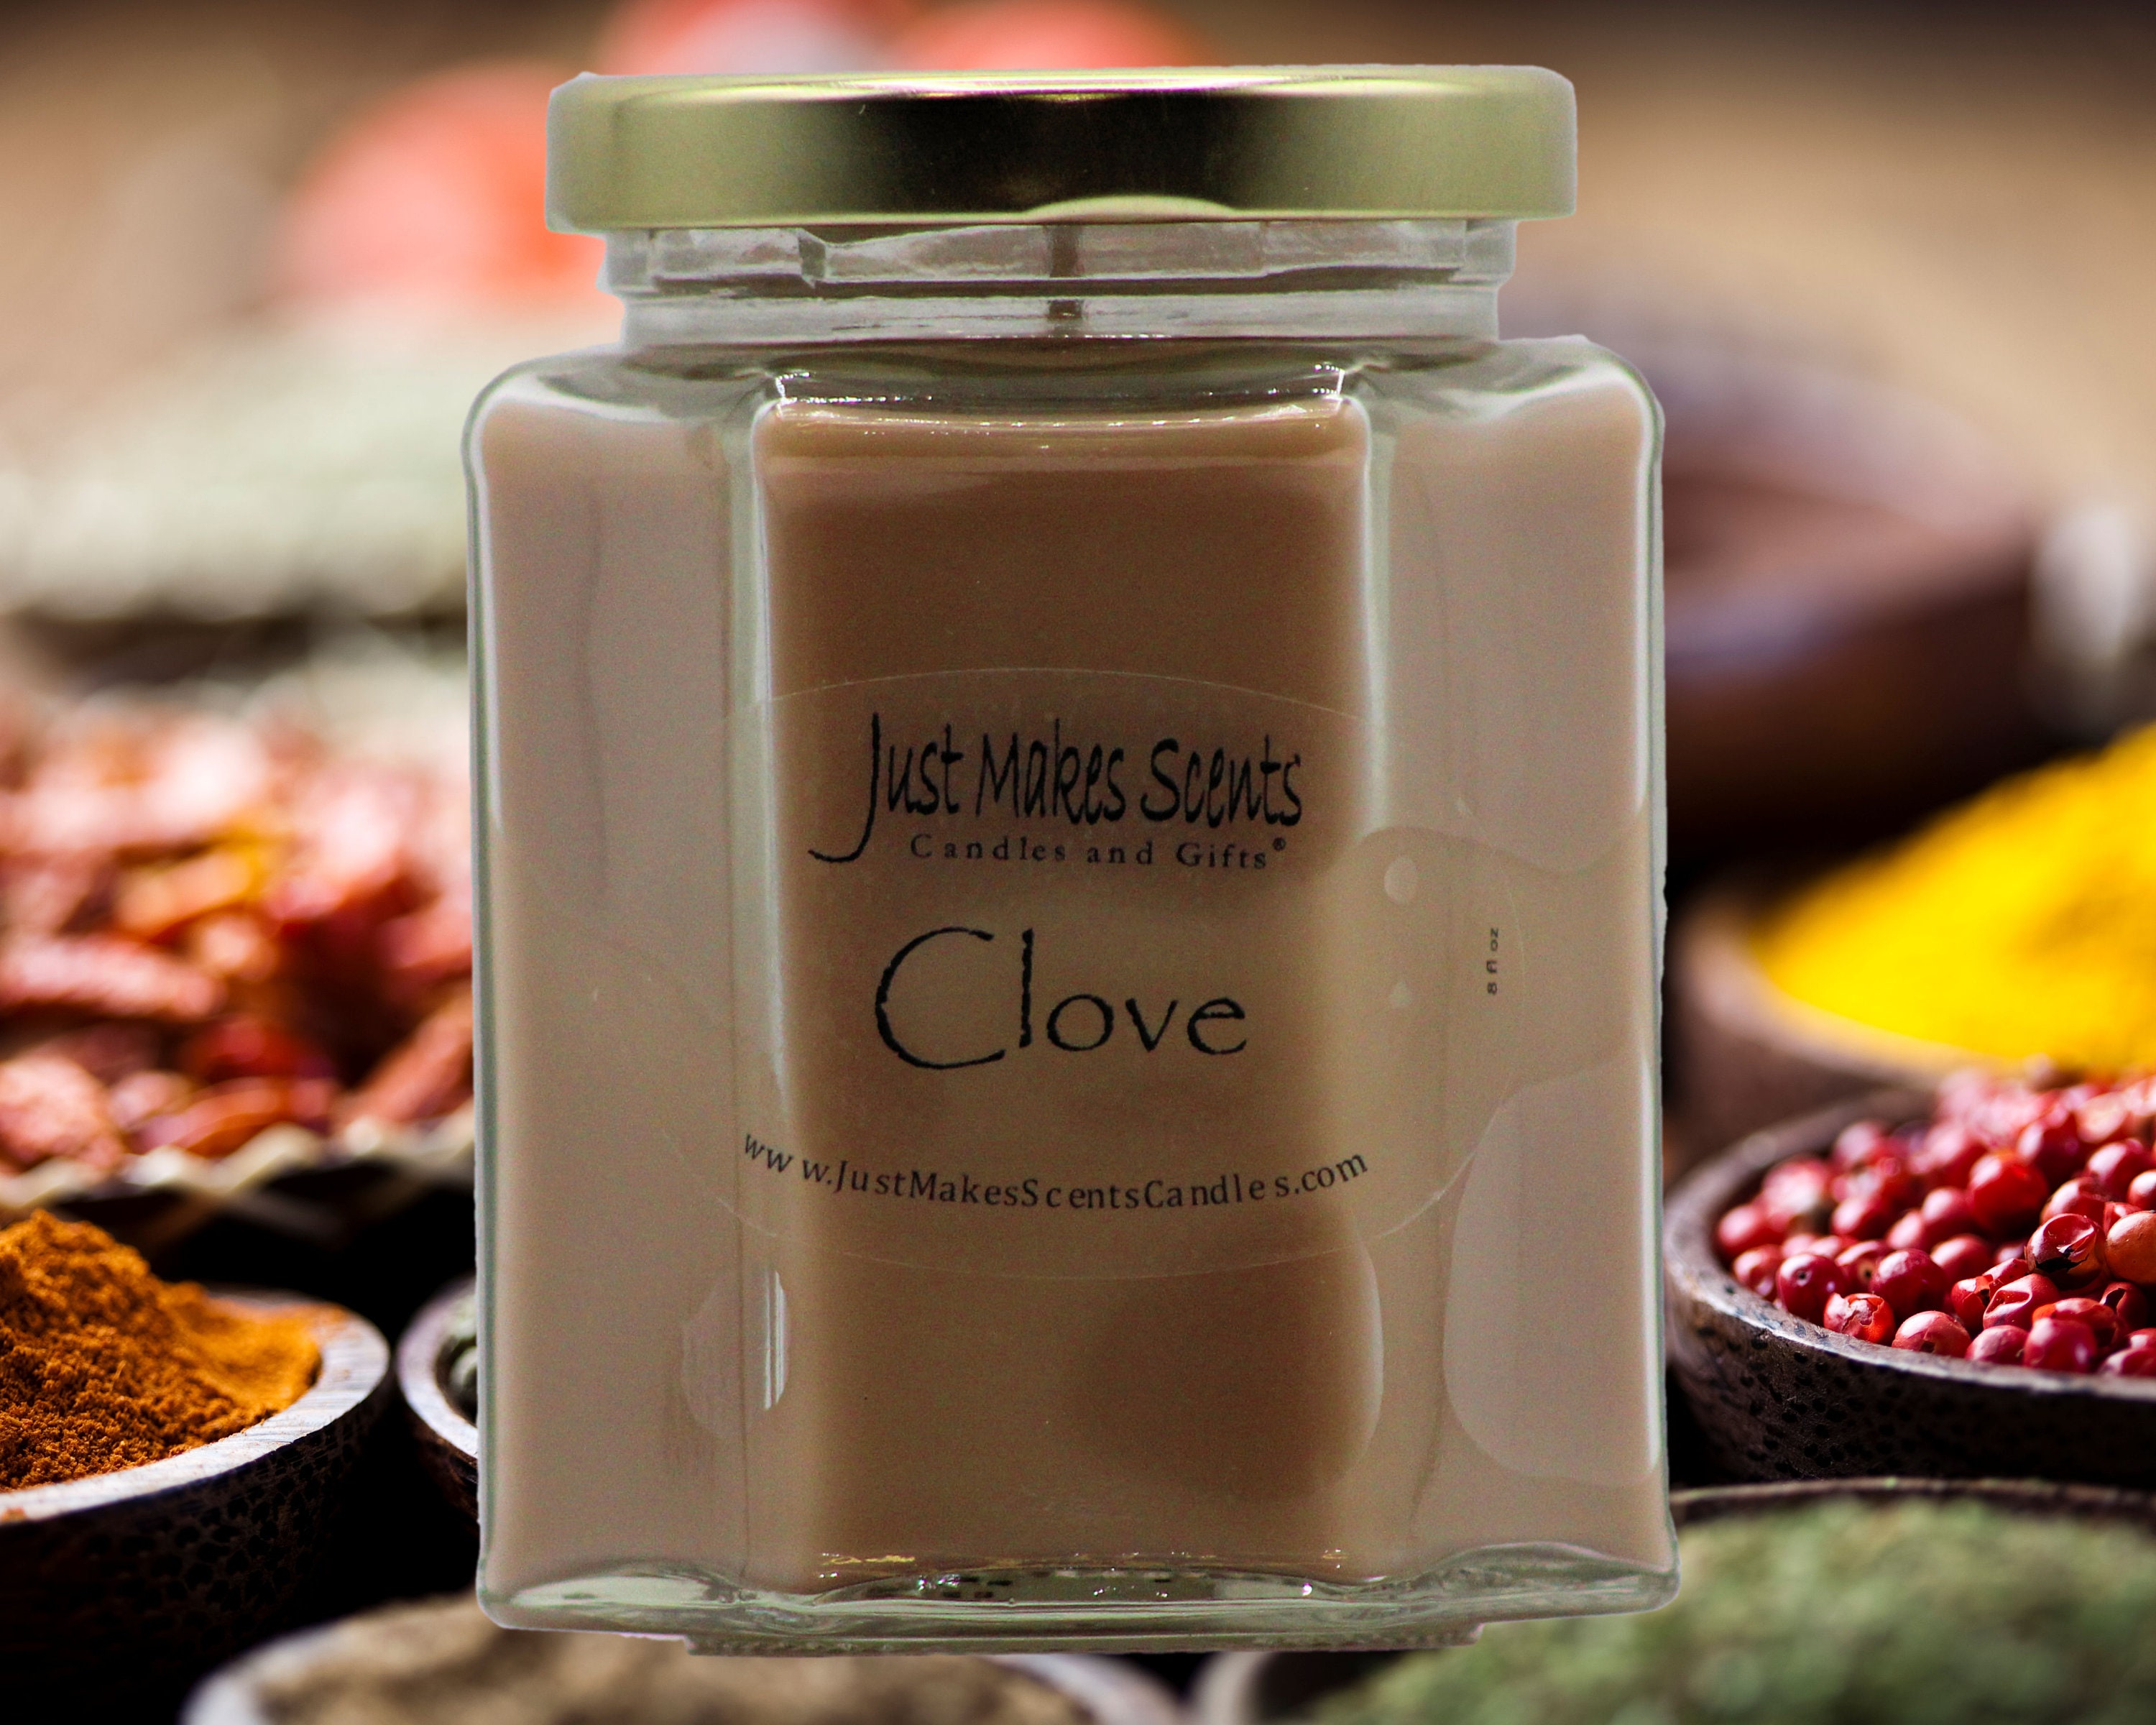 Clove Scented Candle - Blended Soy Candles Great Kitchen Spice Fragrance